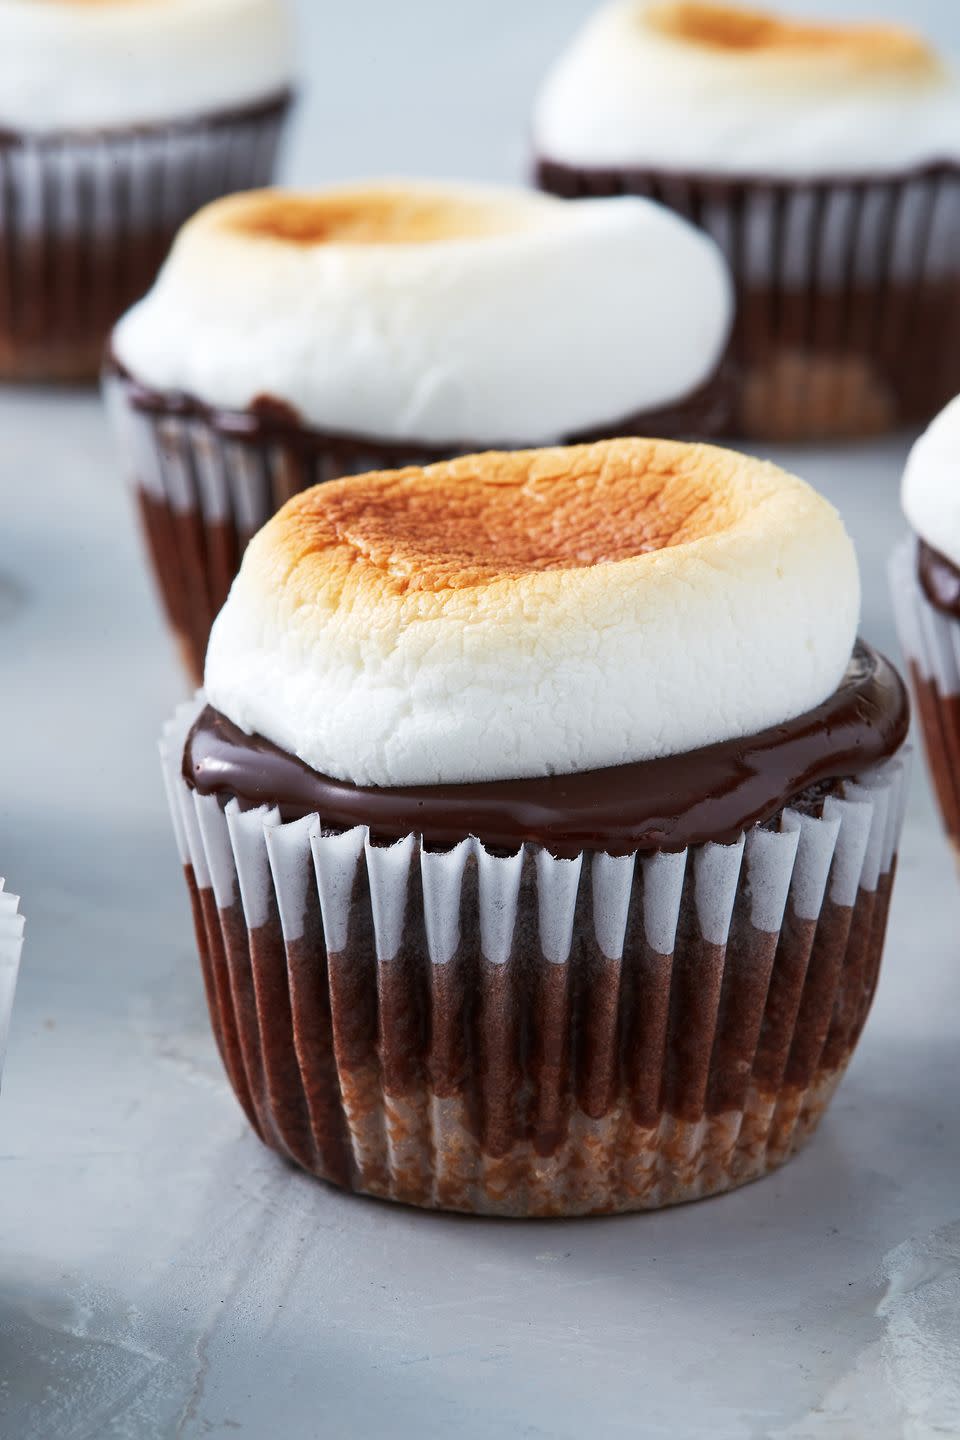 S'mores Cupcakes